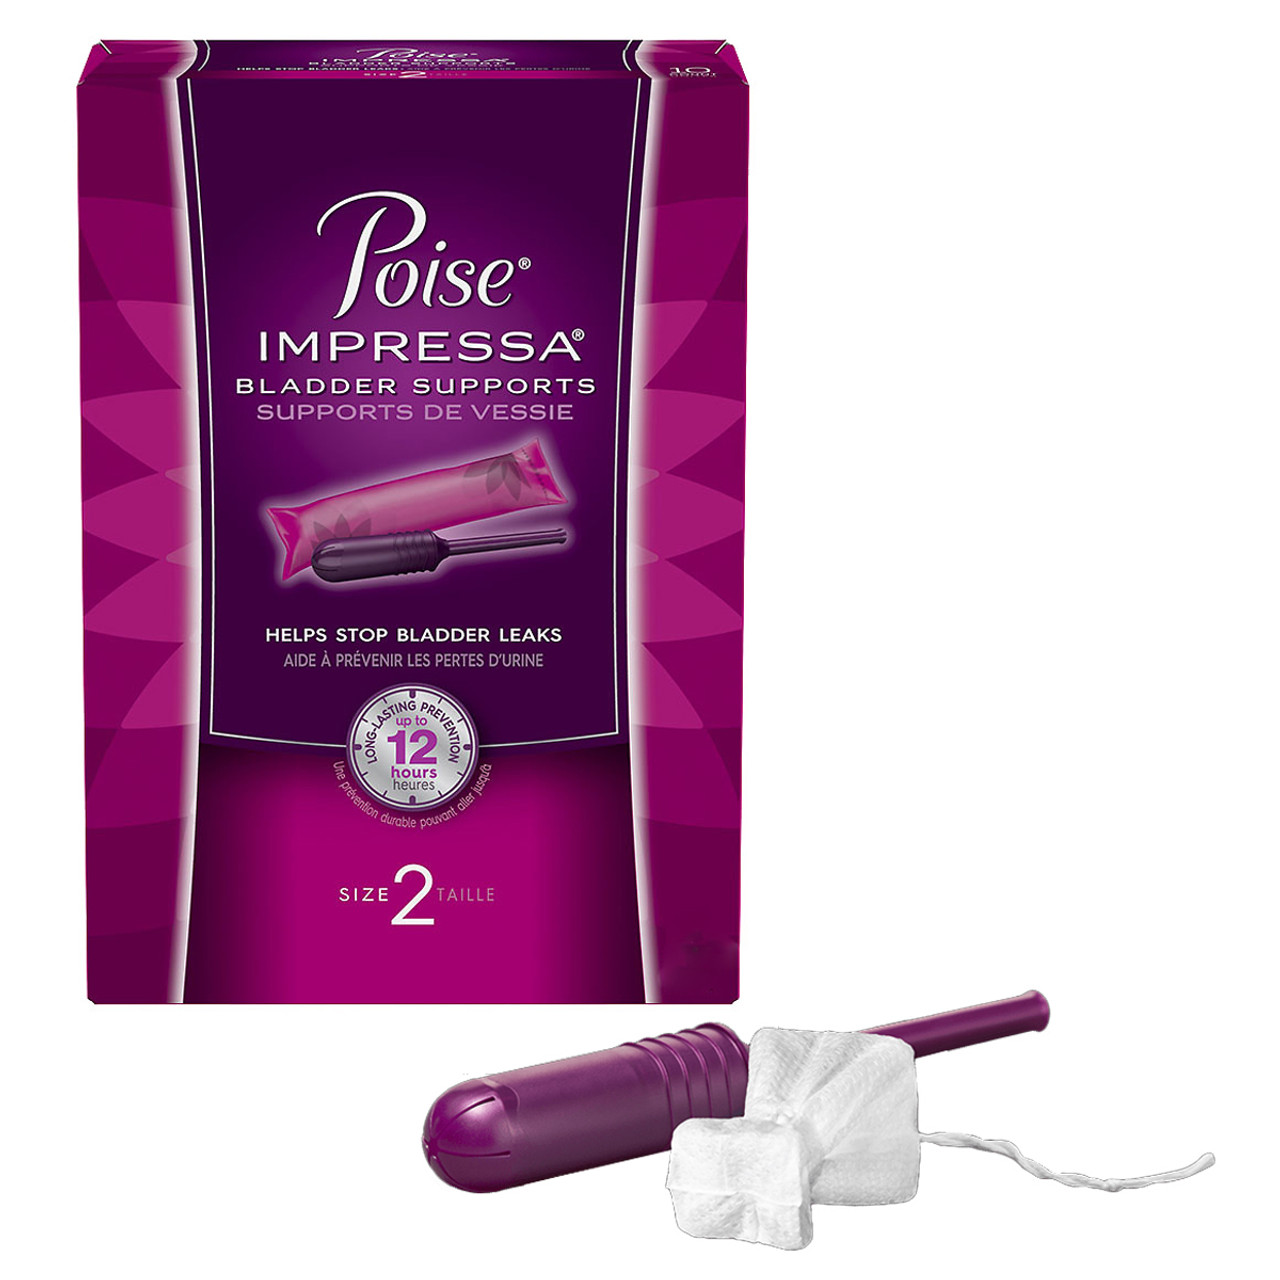 Take Back Control! Stop Bladder Leakage With Poise Impressa - The